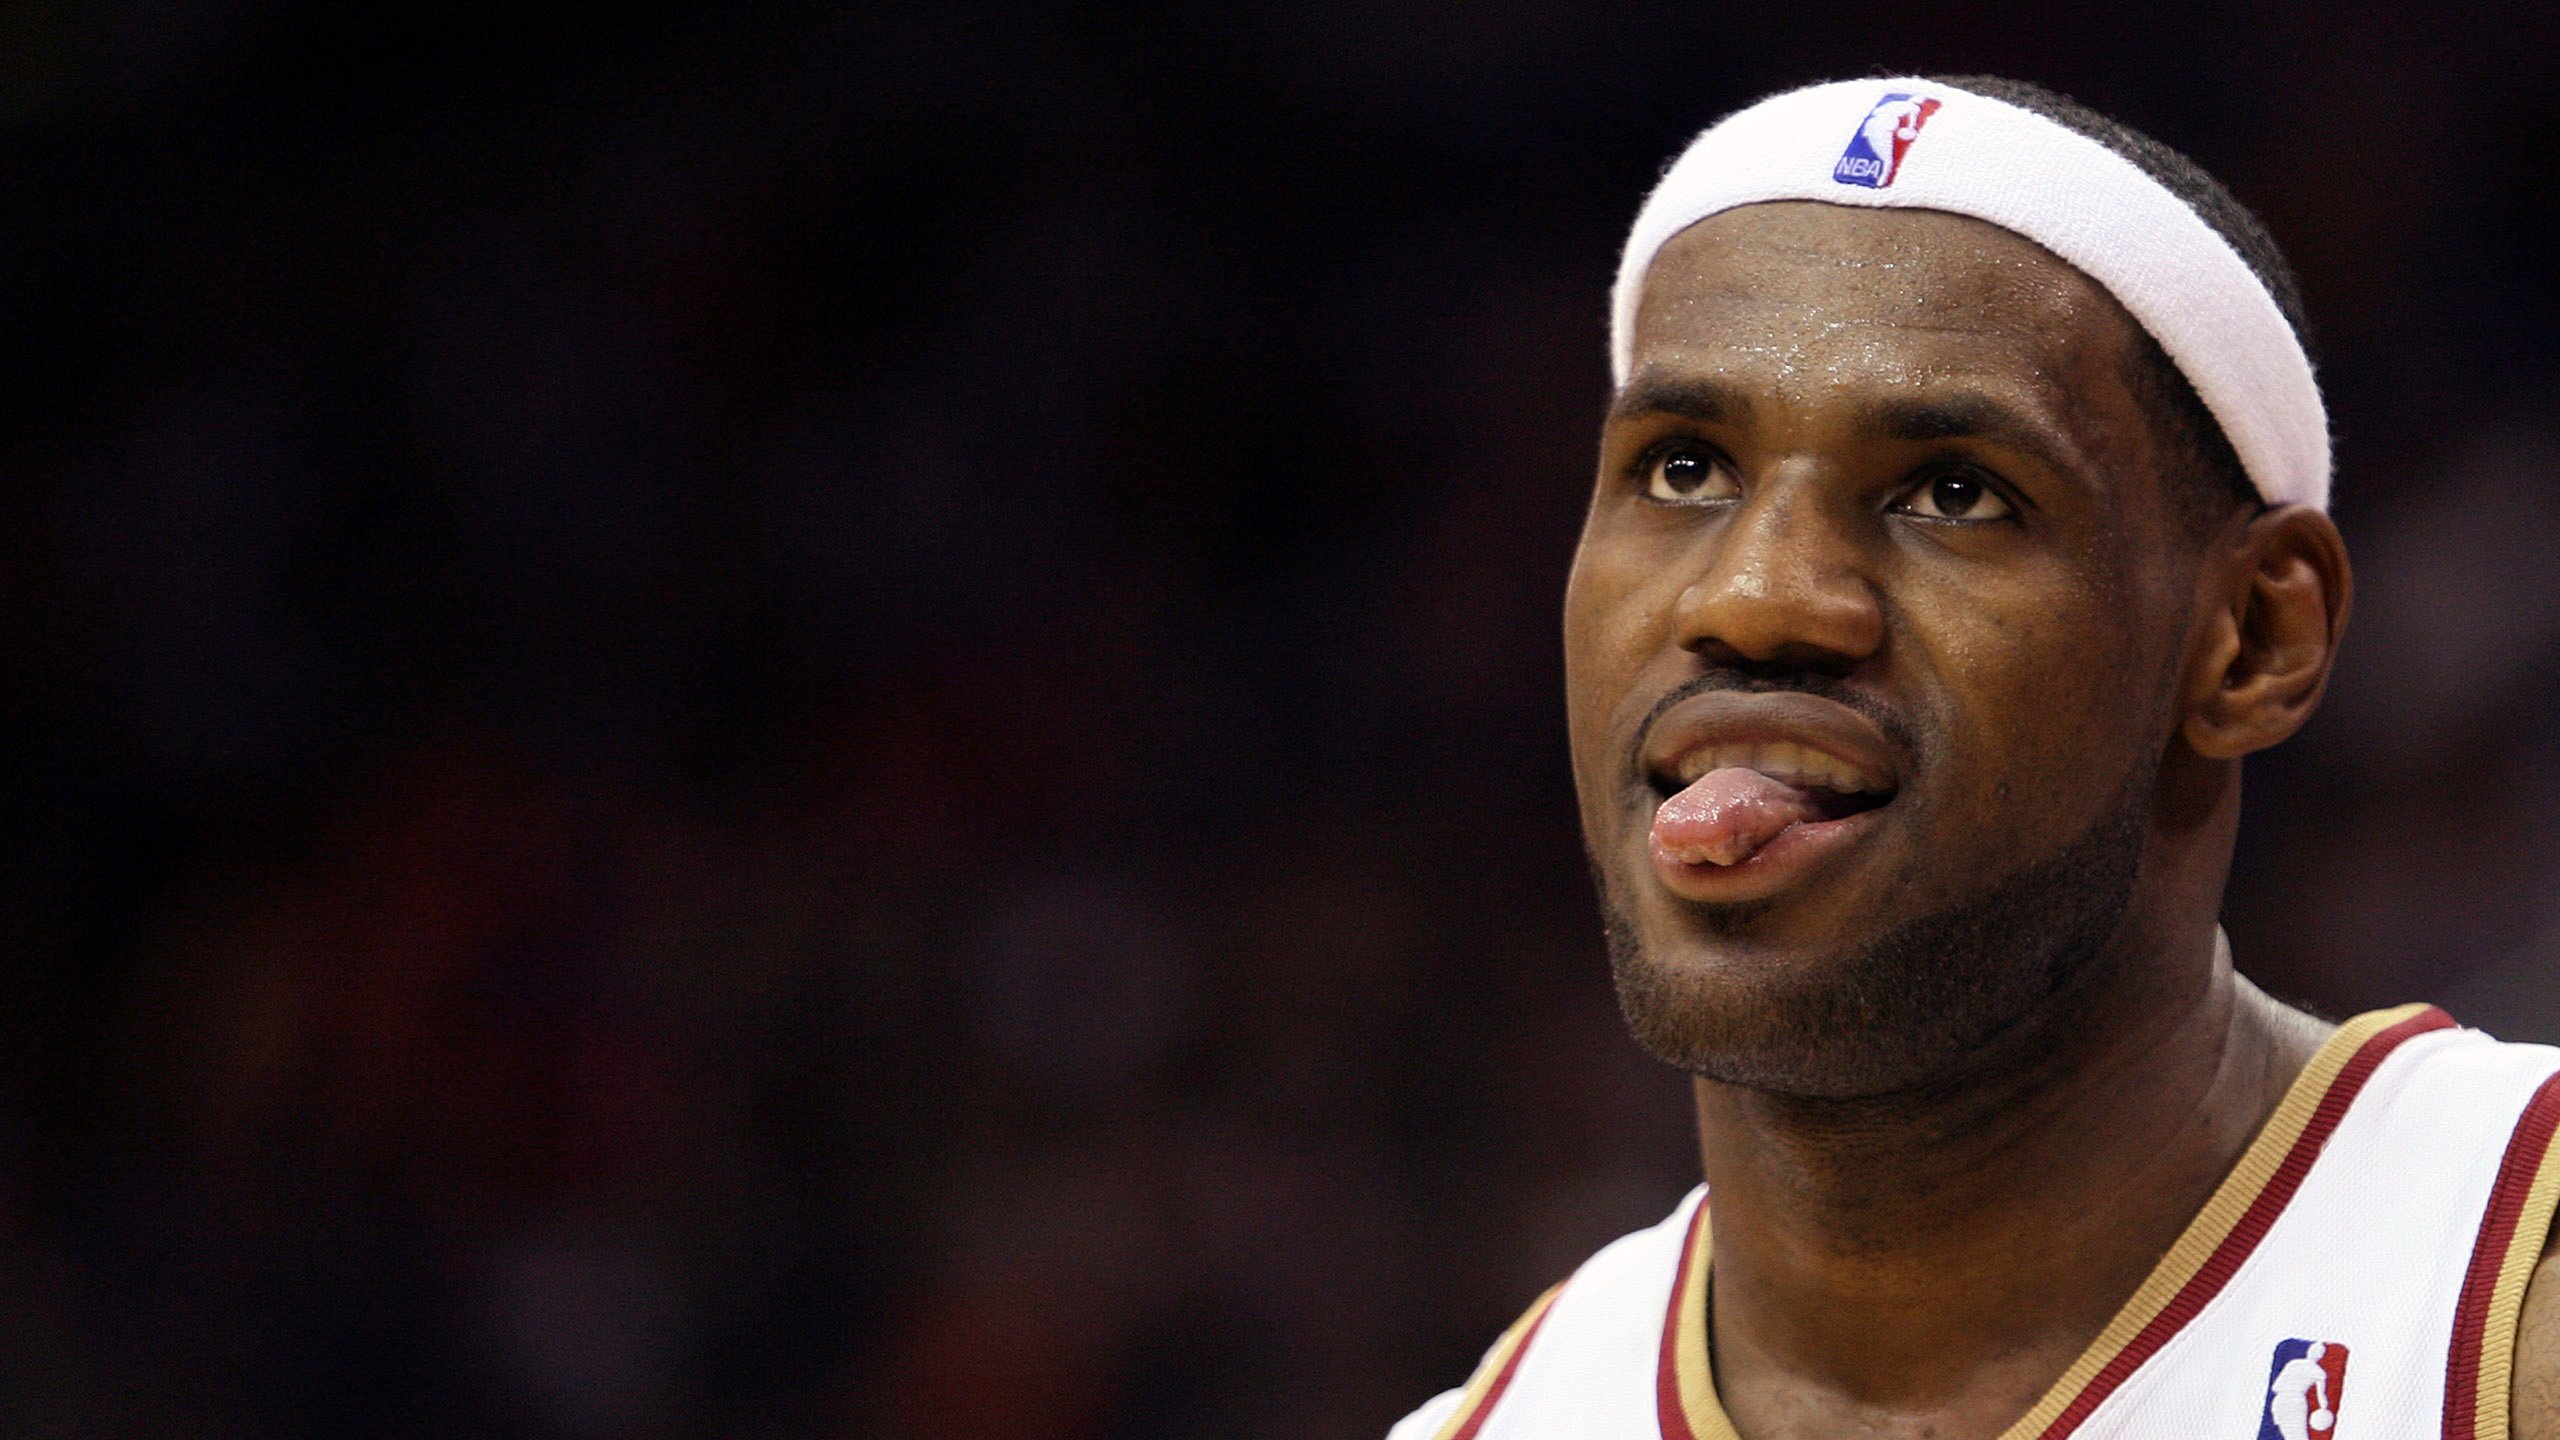 LeBron James Is Showing Tongue Out Standing In A Blur Black Background Wearing White Dress HD Sports Wallpaper